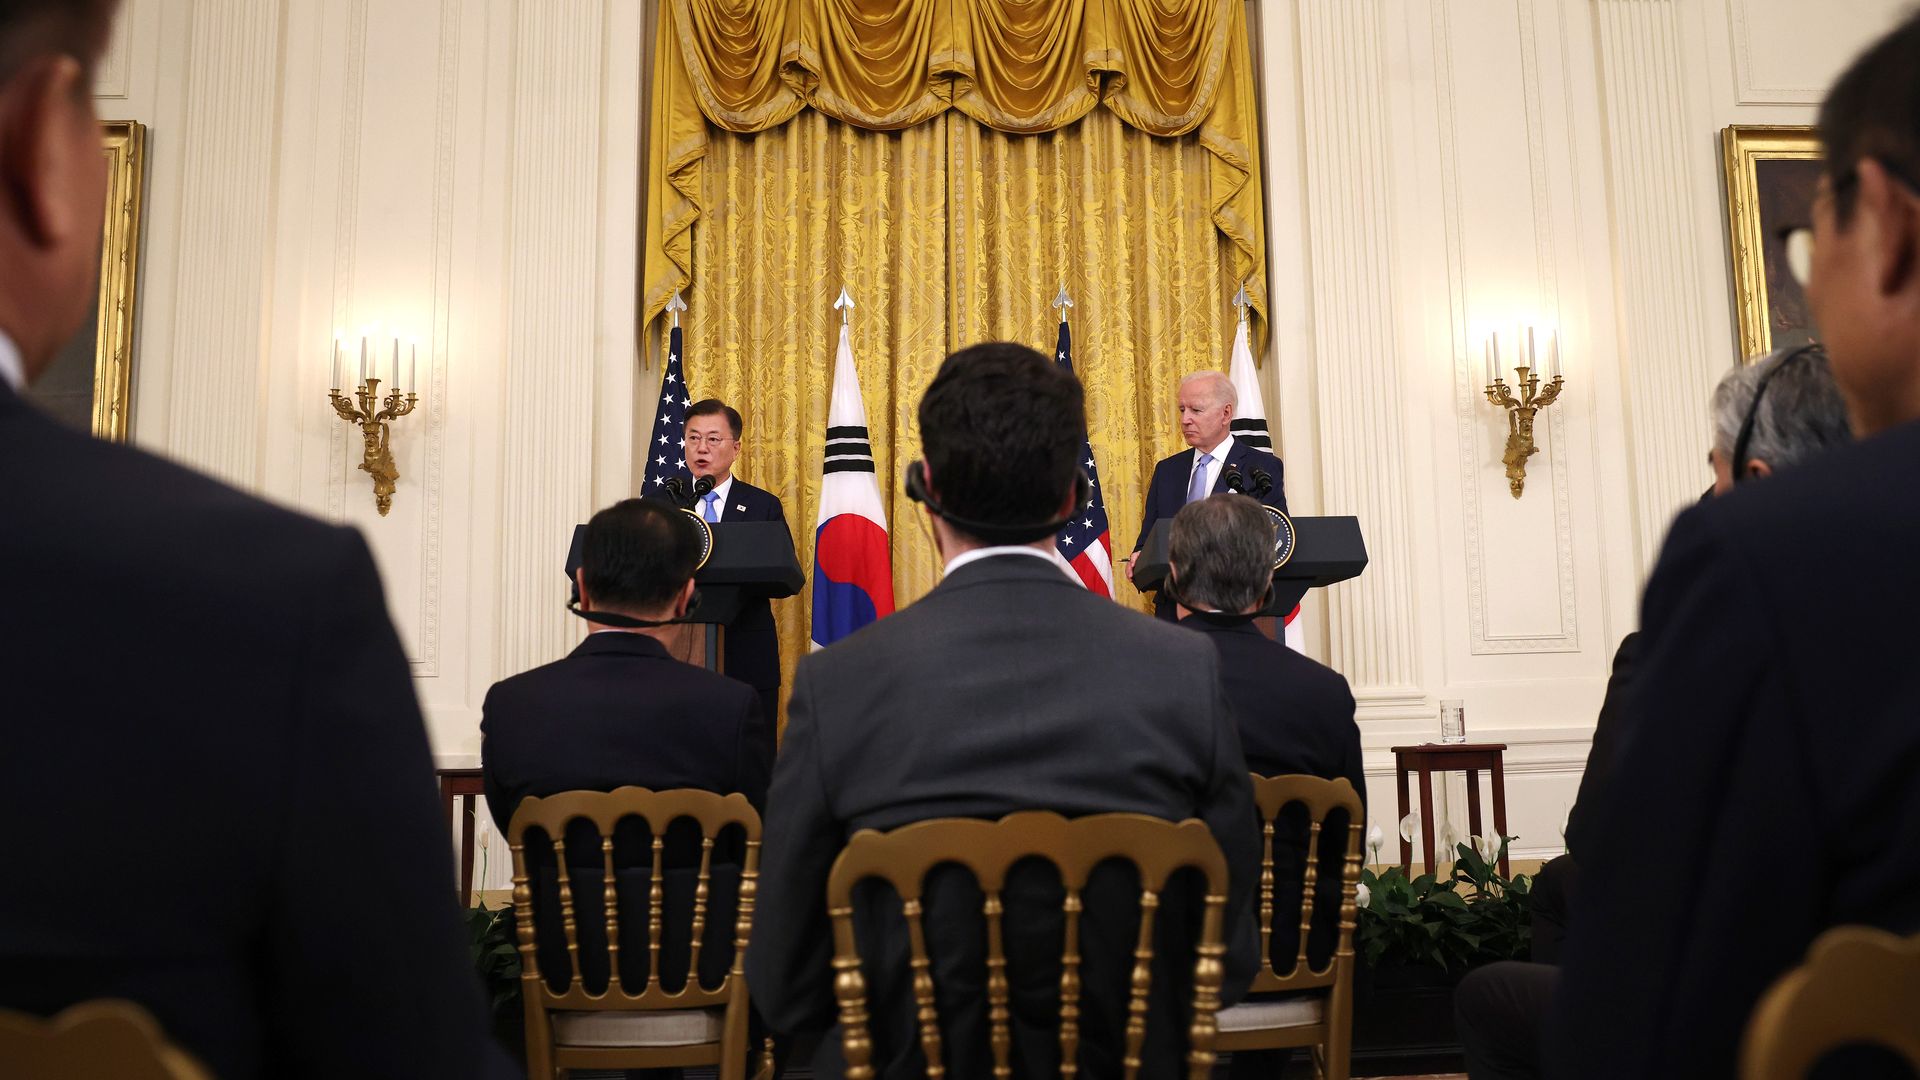 Photo of Moon Jae-in and Joe Biden speaking behind podiums that are positioned next to each other